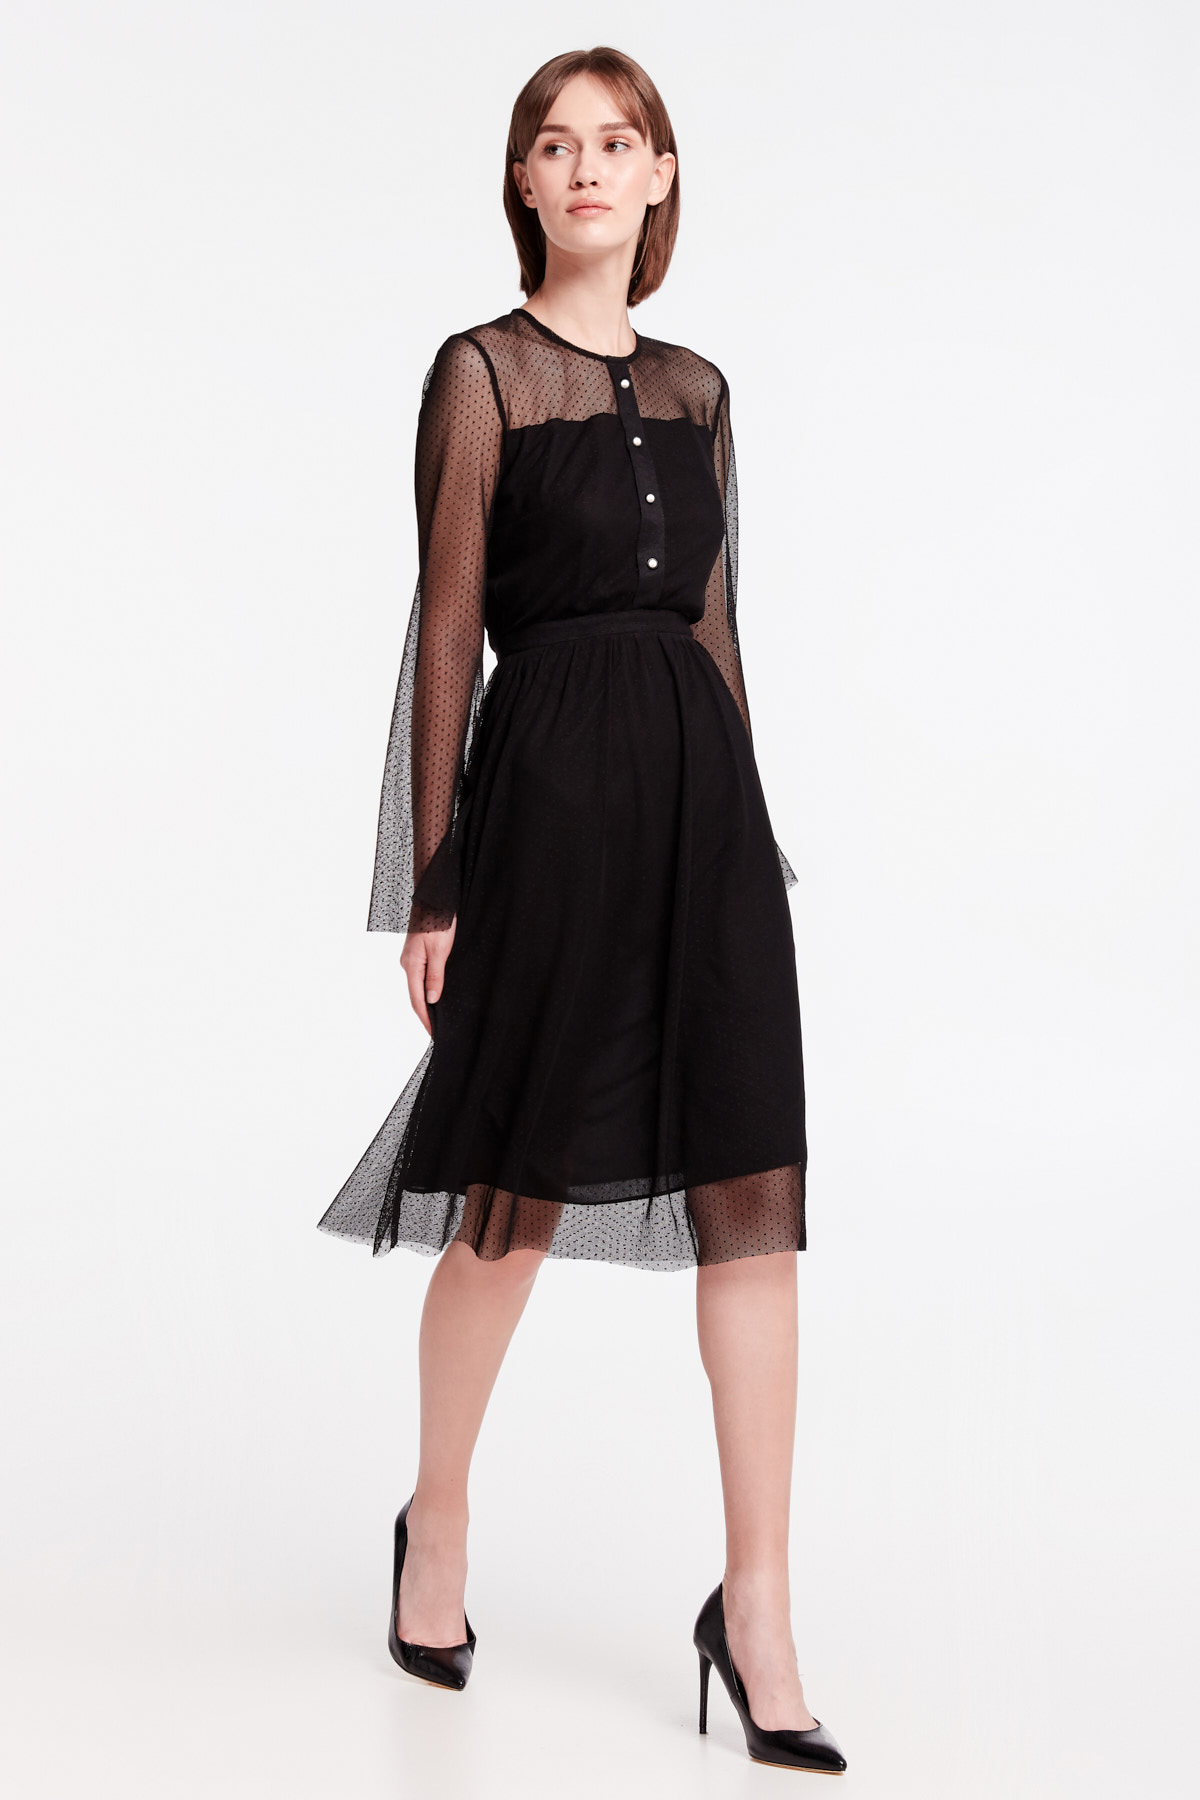 Black lace dress with buttons, photo 15